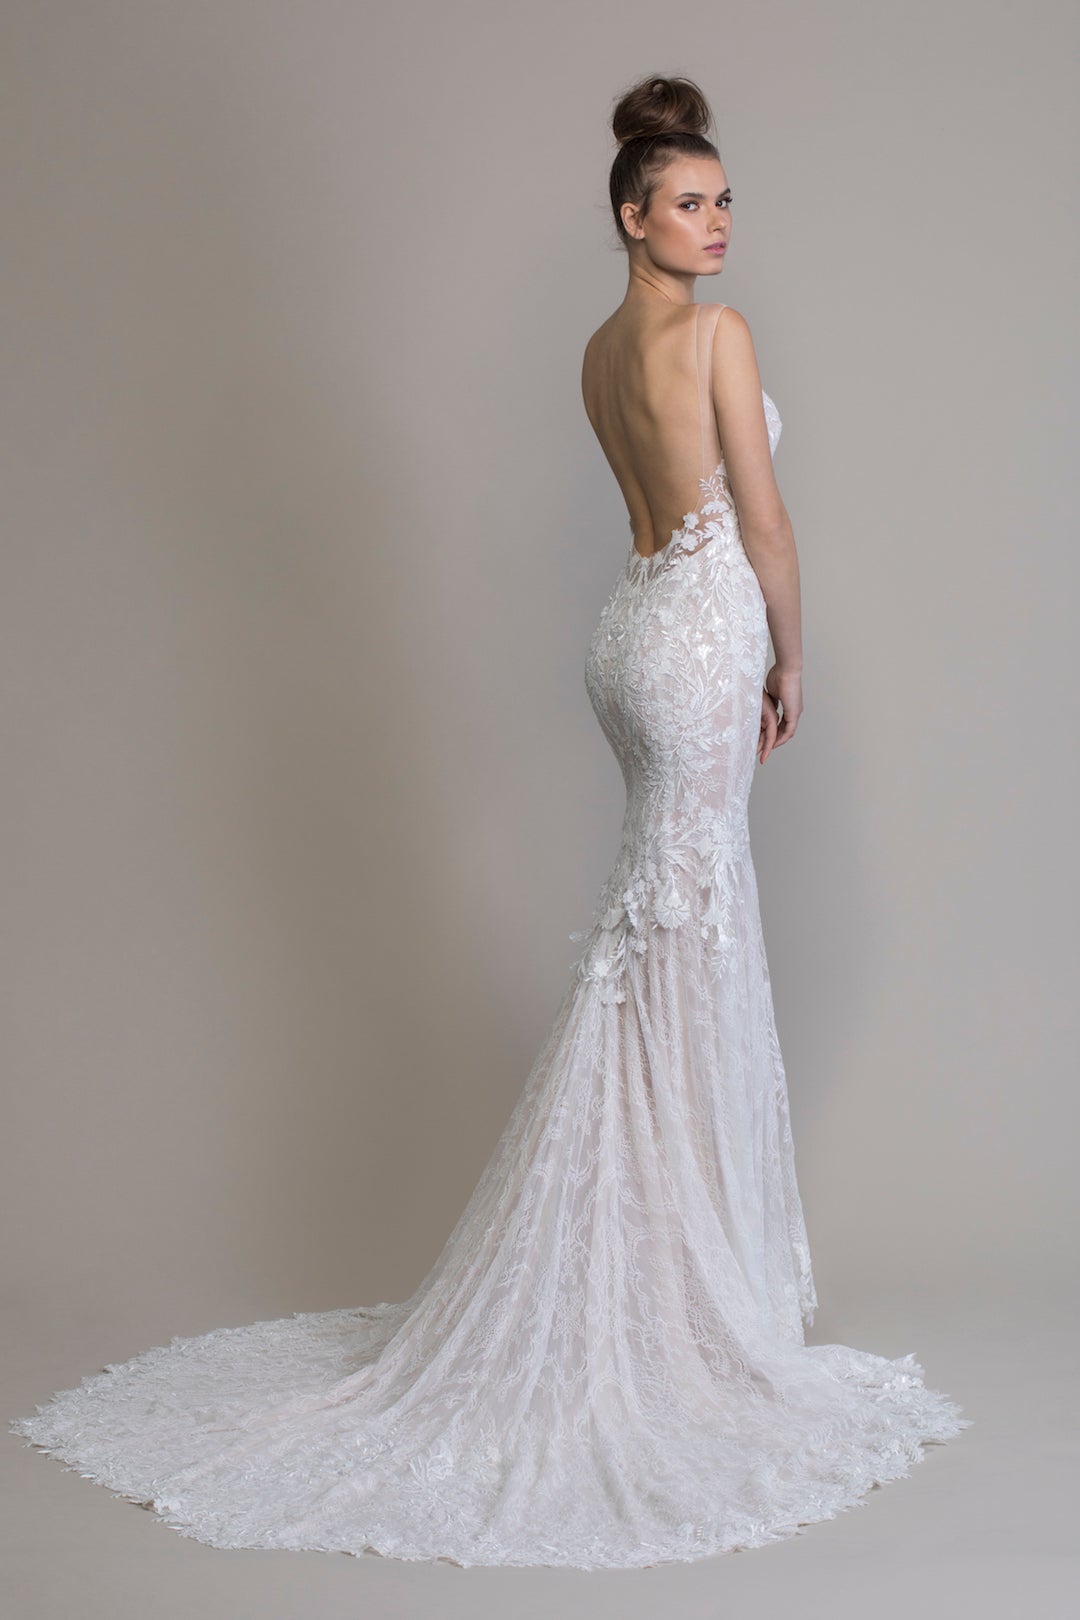 Pnina Tornai's new LOVE 2020 Collection is out! This is style 14755